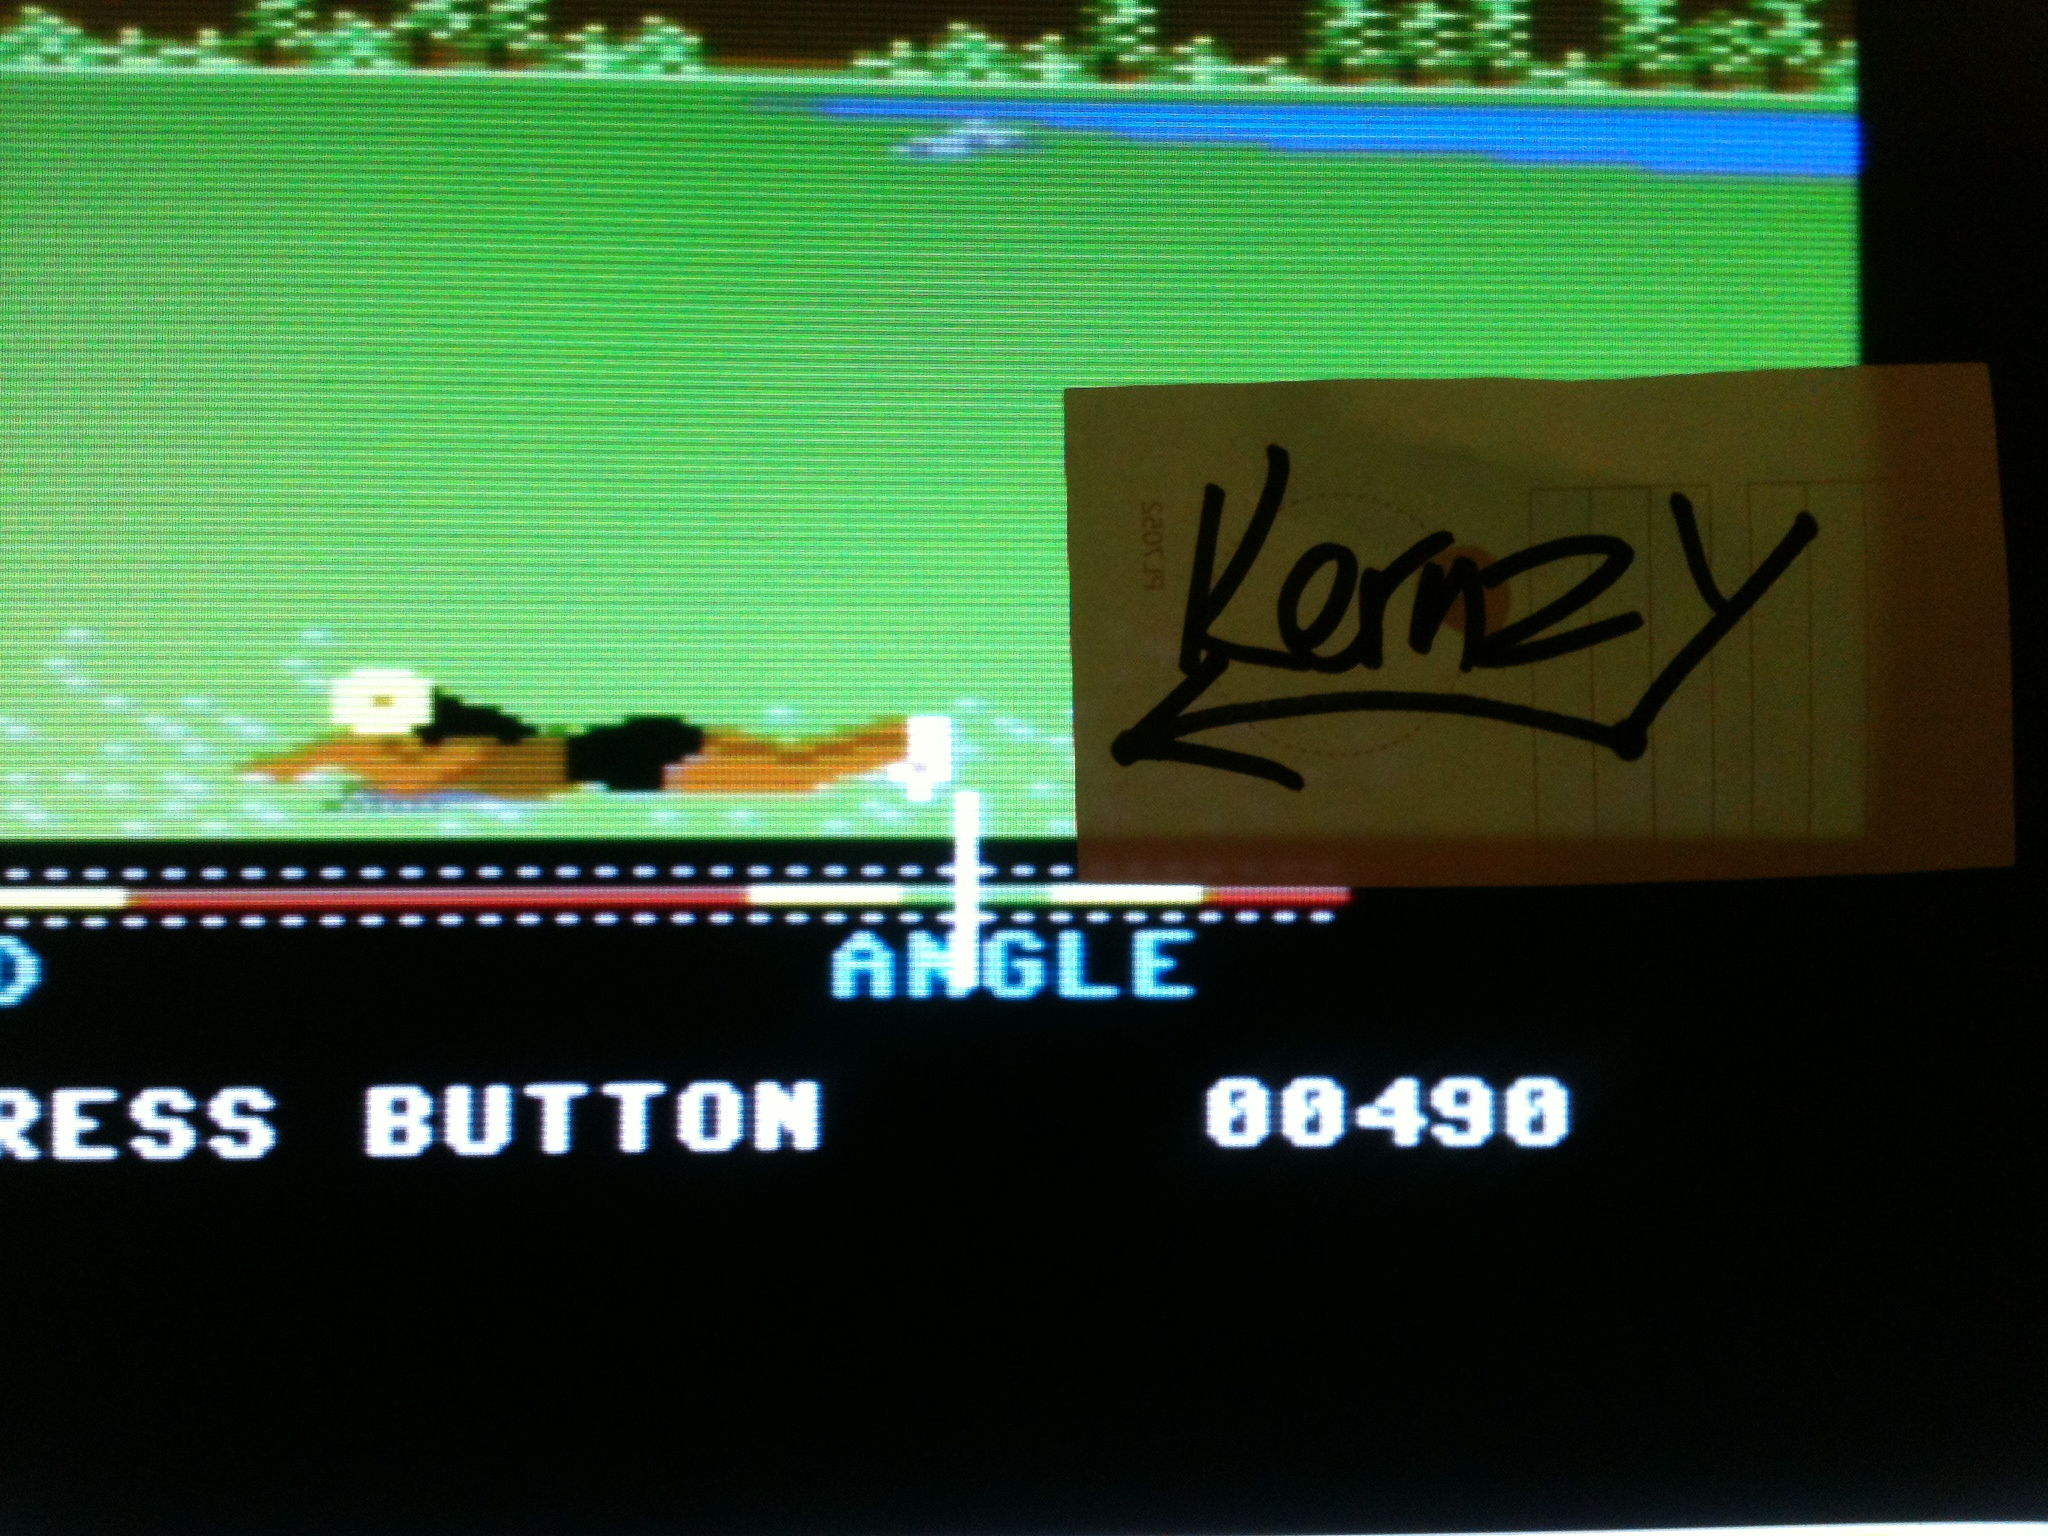 kernzy: California Games: Flying Disk (Commodore 64 Emulated) 490 points on 2015-05-08 14:16:02